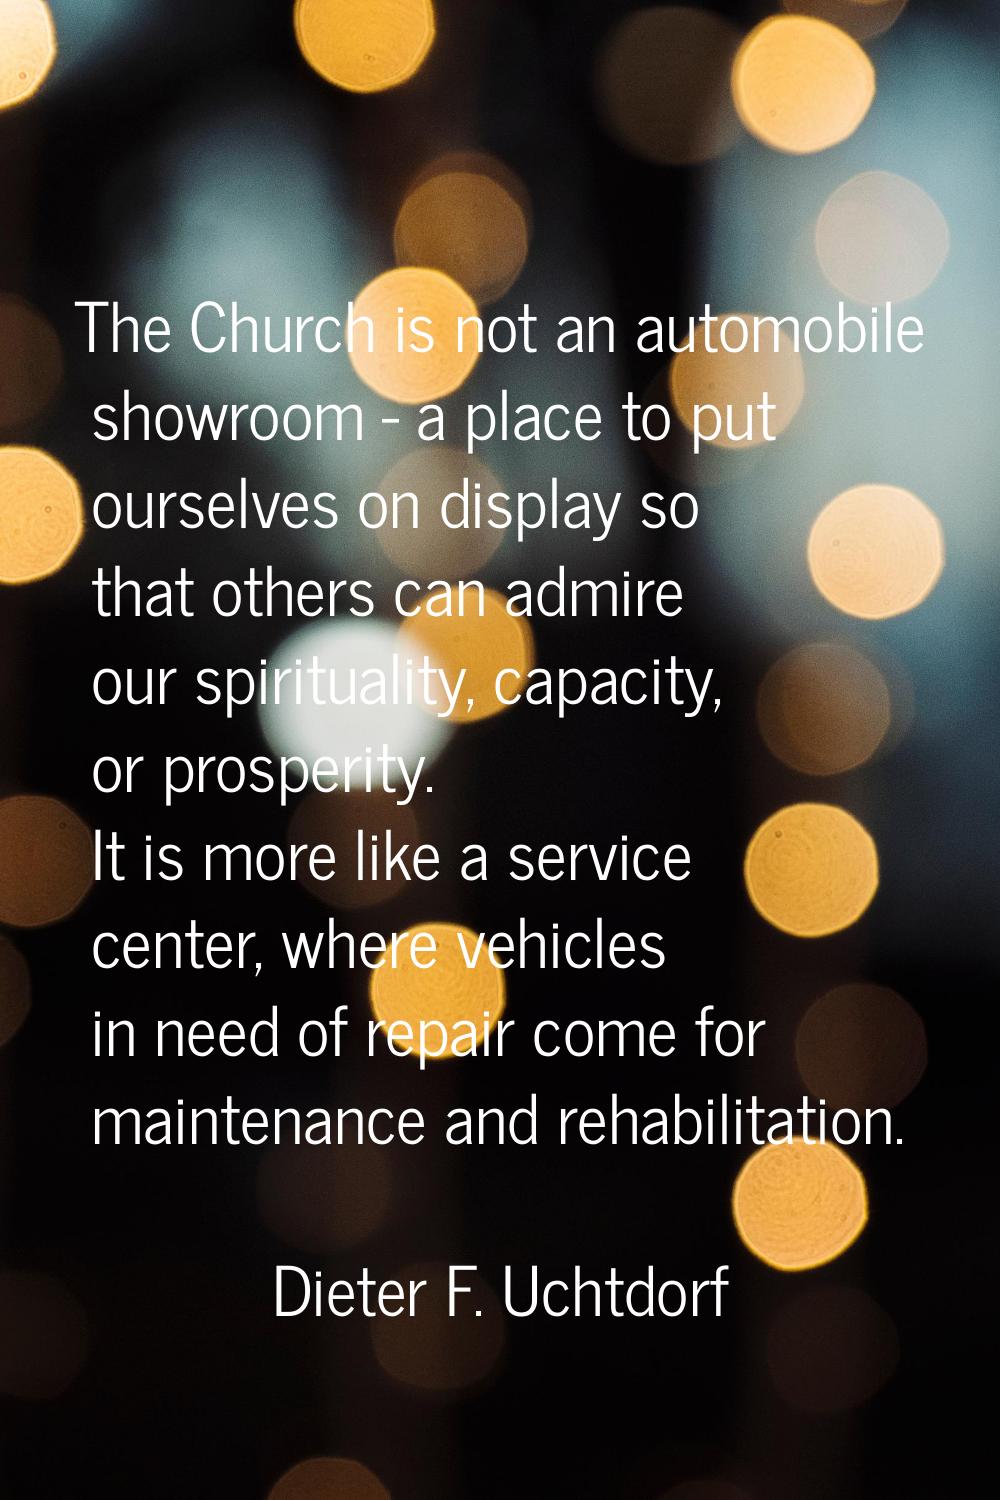 The Church is not an automobile showroom - a place to put ourselves on display so that others can a